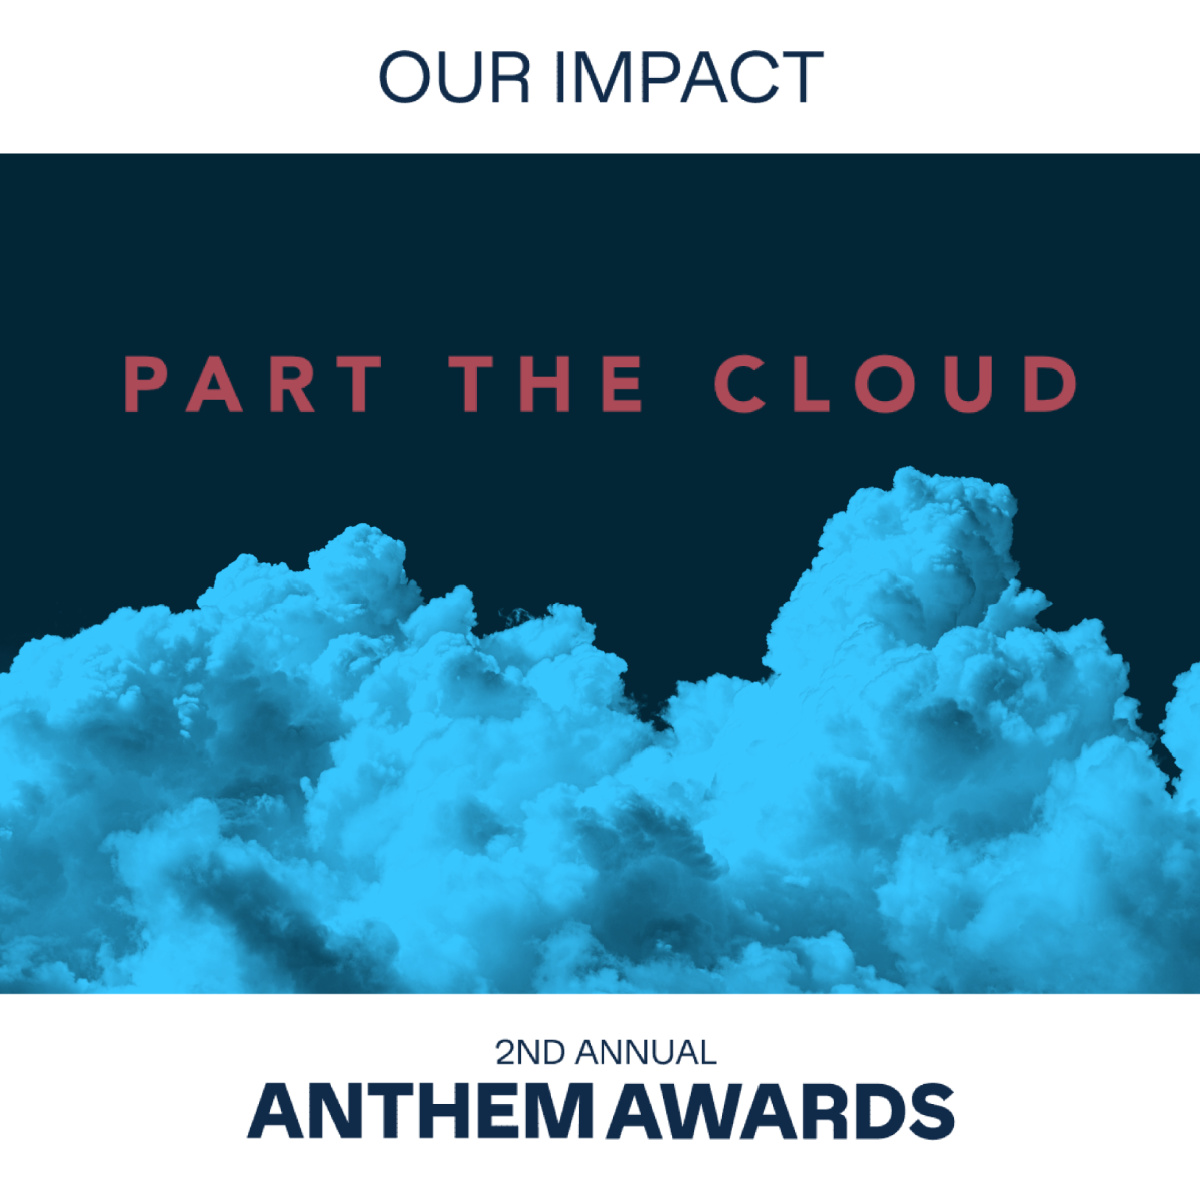 #PartTheCloud was recognized at the @AnthemAwards yesterday! We're thrilled about this award and the continued impact Part the Cloud is making to accelerate Alzheimer's research. Learn more at alz.org/PartTheCloud. #ENDALZ #AnthemAwards